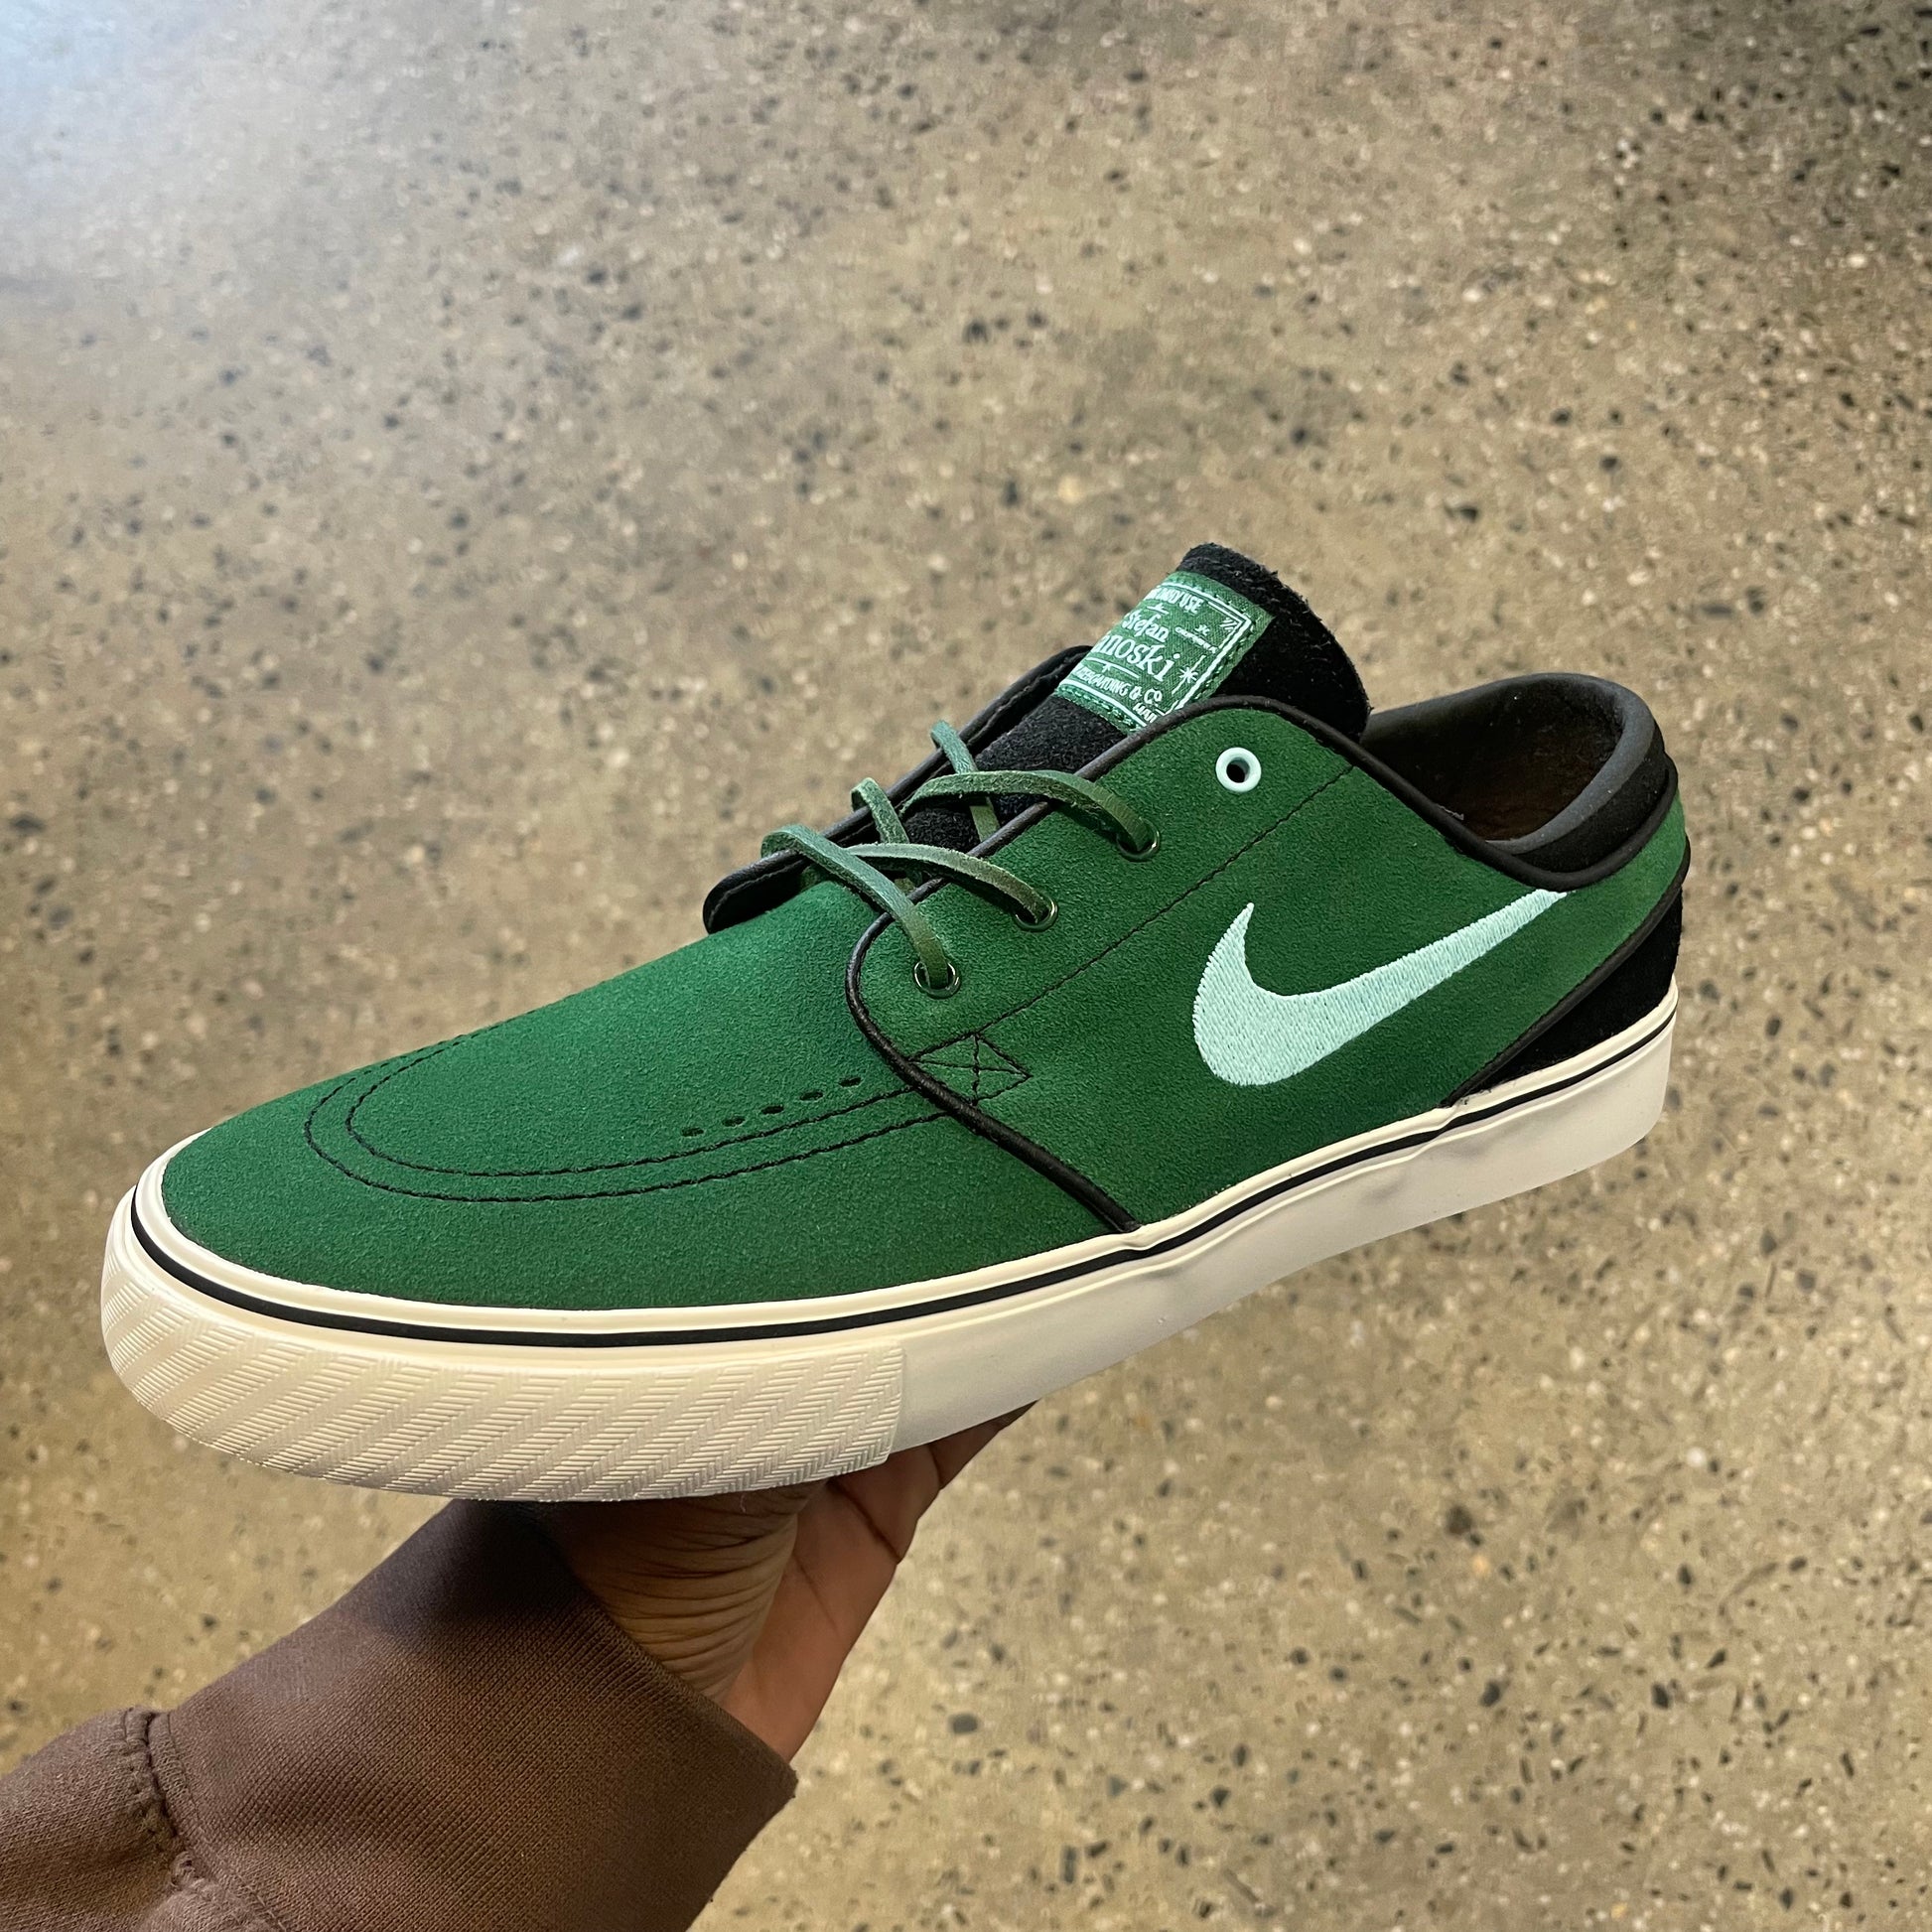 green suede sneaker with white sole